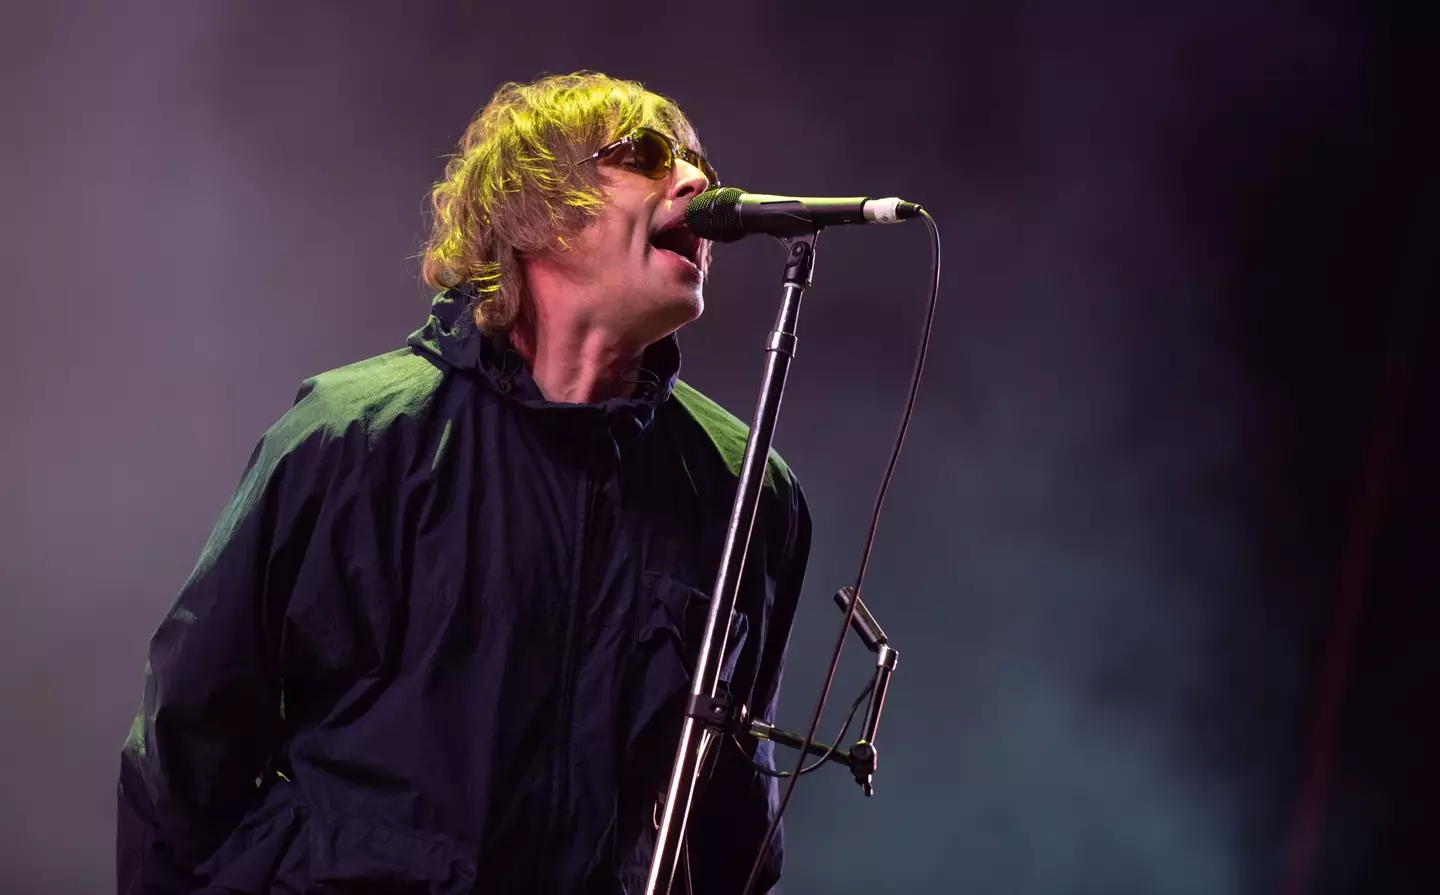 The former Oasis frontman opened up about his thyroid-related arthritis.